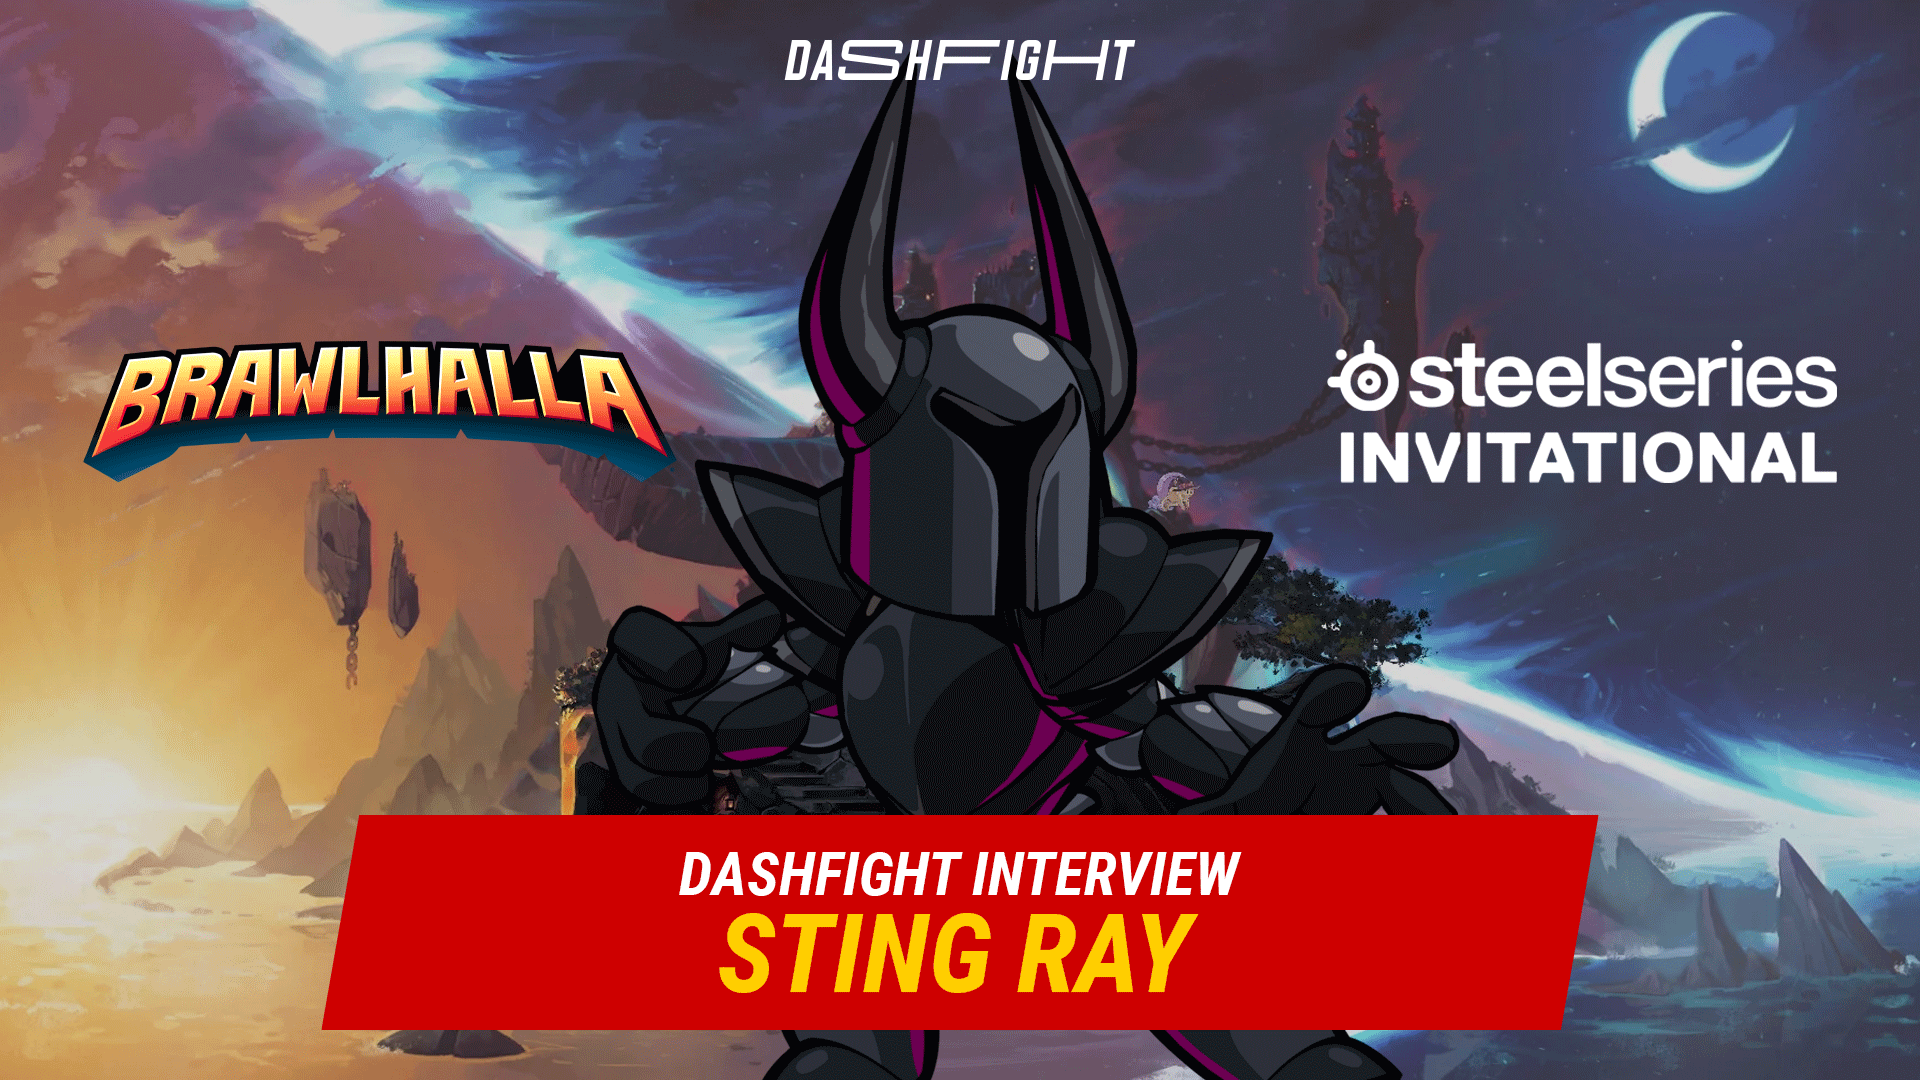 Sting Ray: “Now I know that I have the potential to win anything”